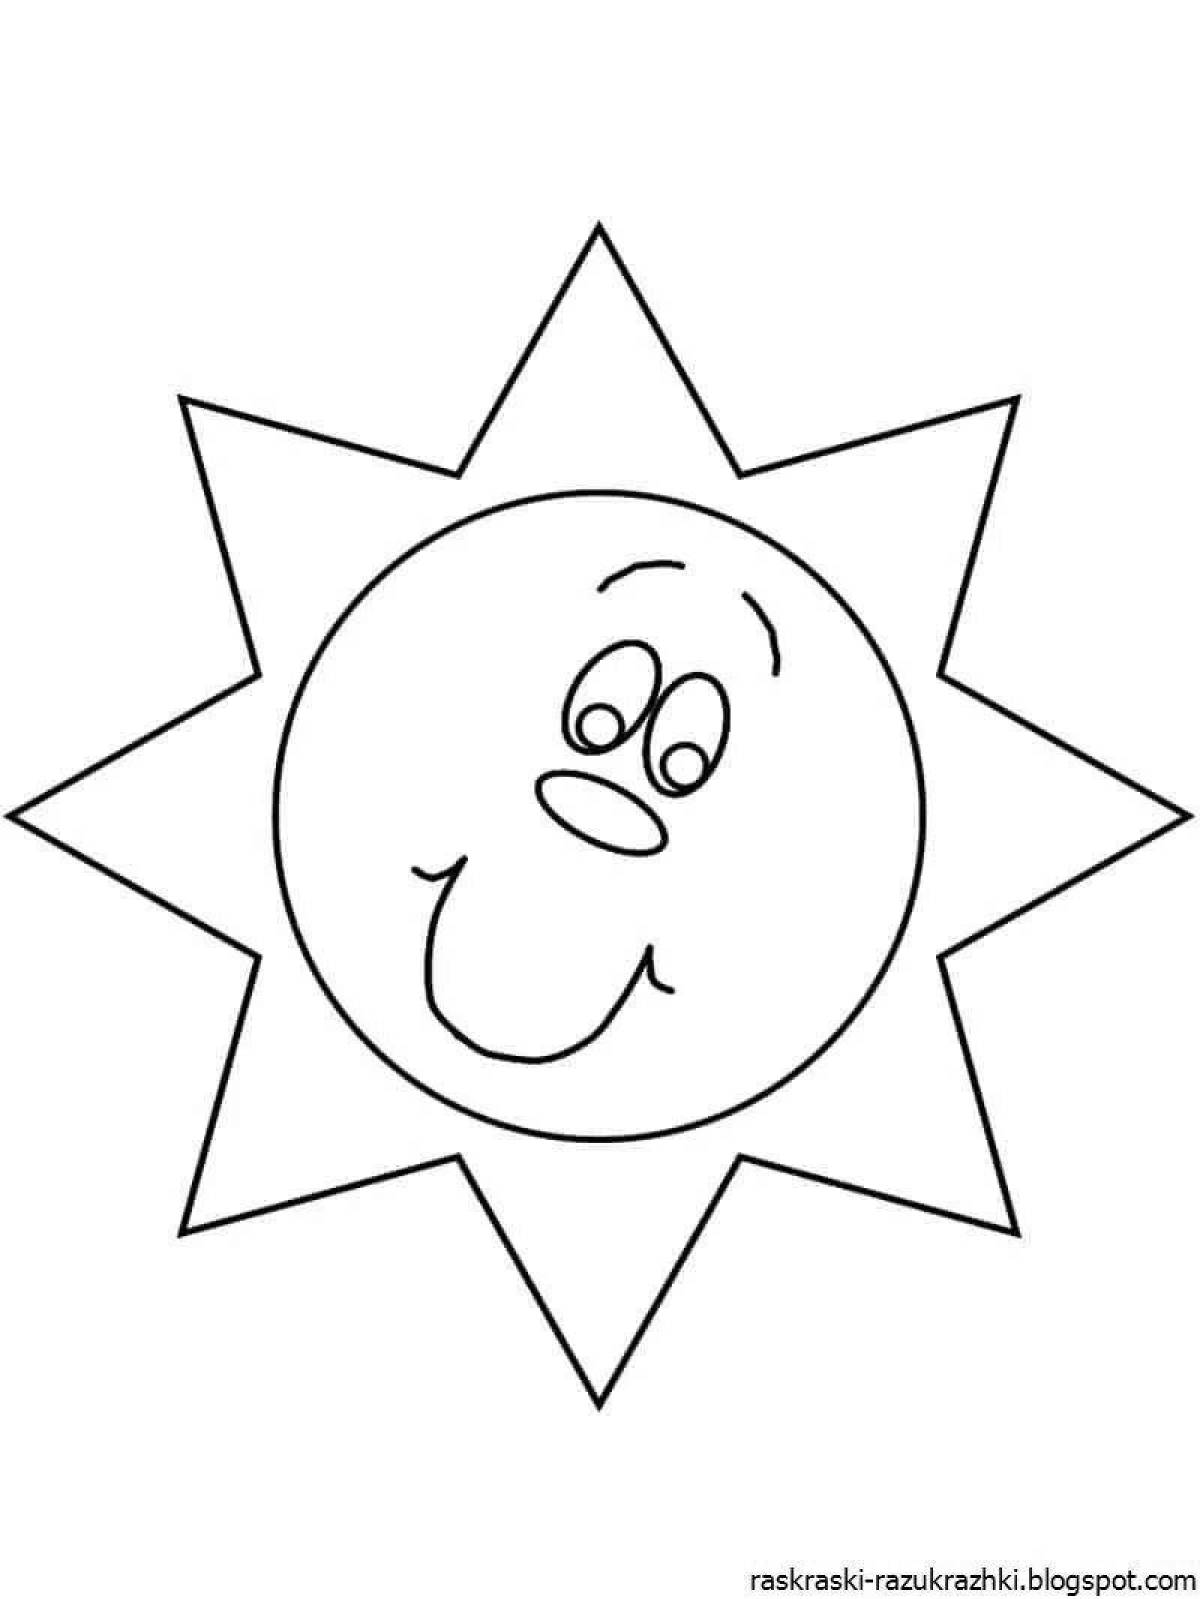 Great sunshine coloring book for kids